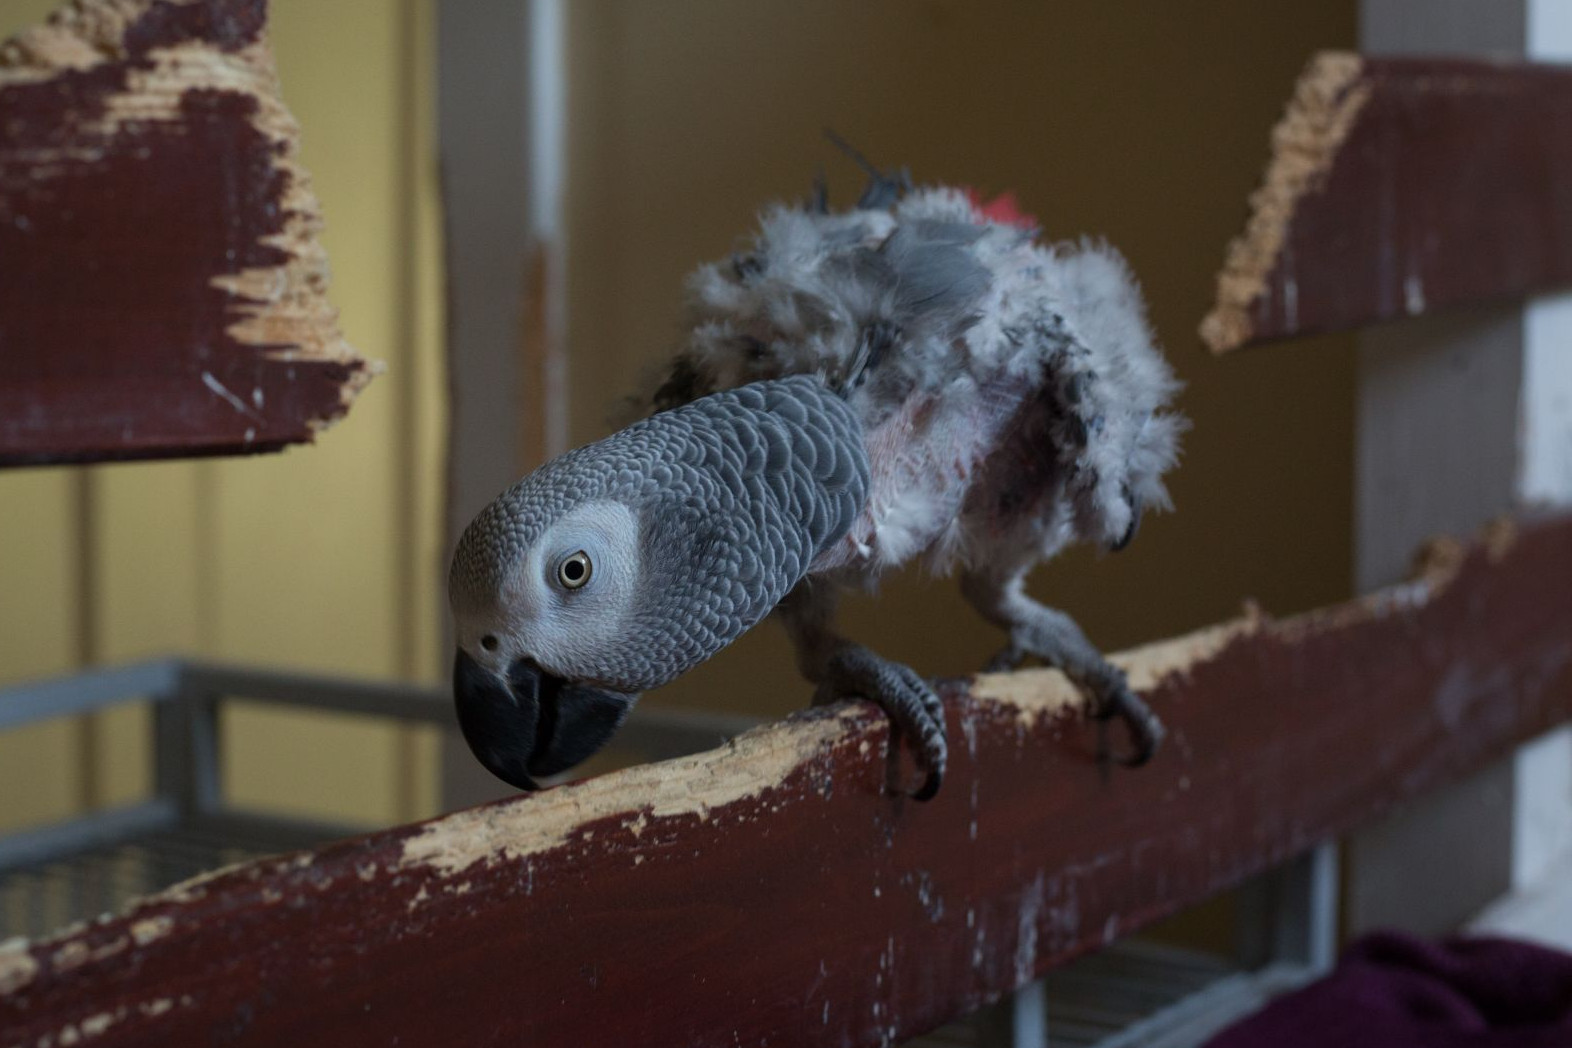 African grey parrot - Wildlife. Not pets - World Animal Protection